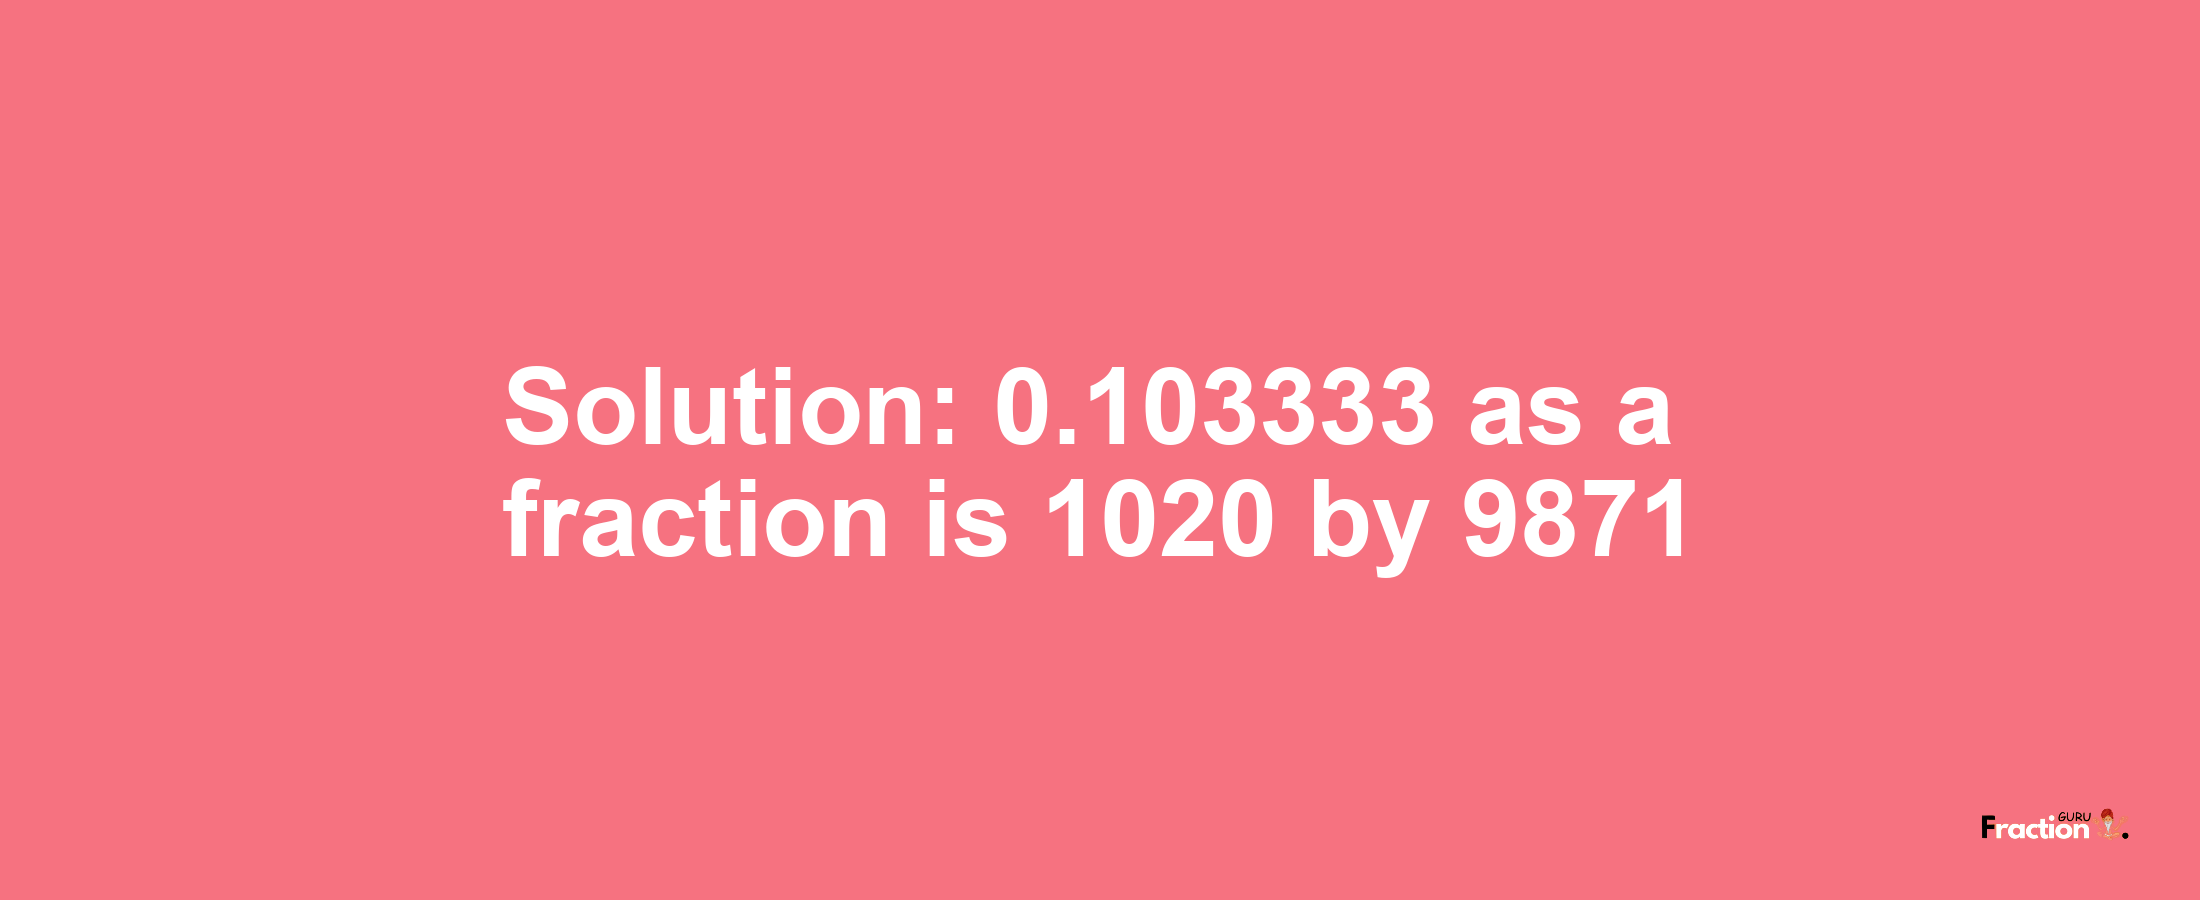 Solution:0.103333 as a fraction is 1020/9871